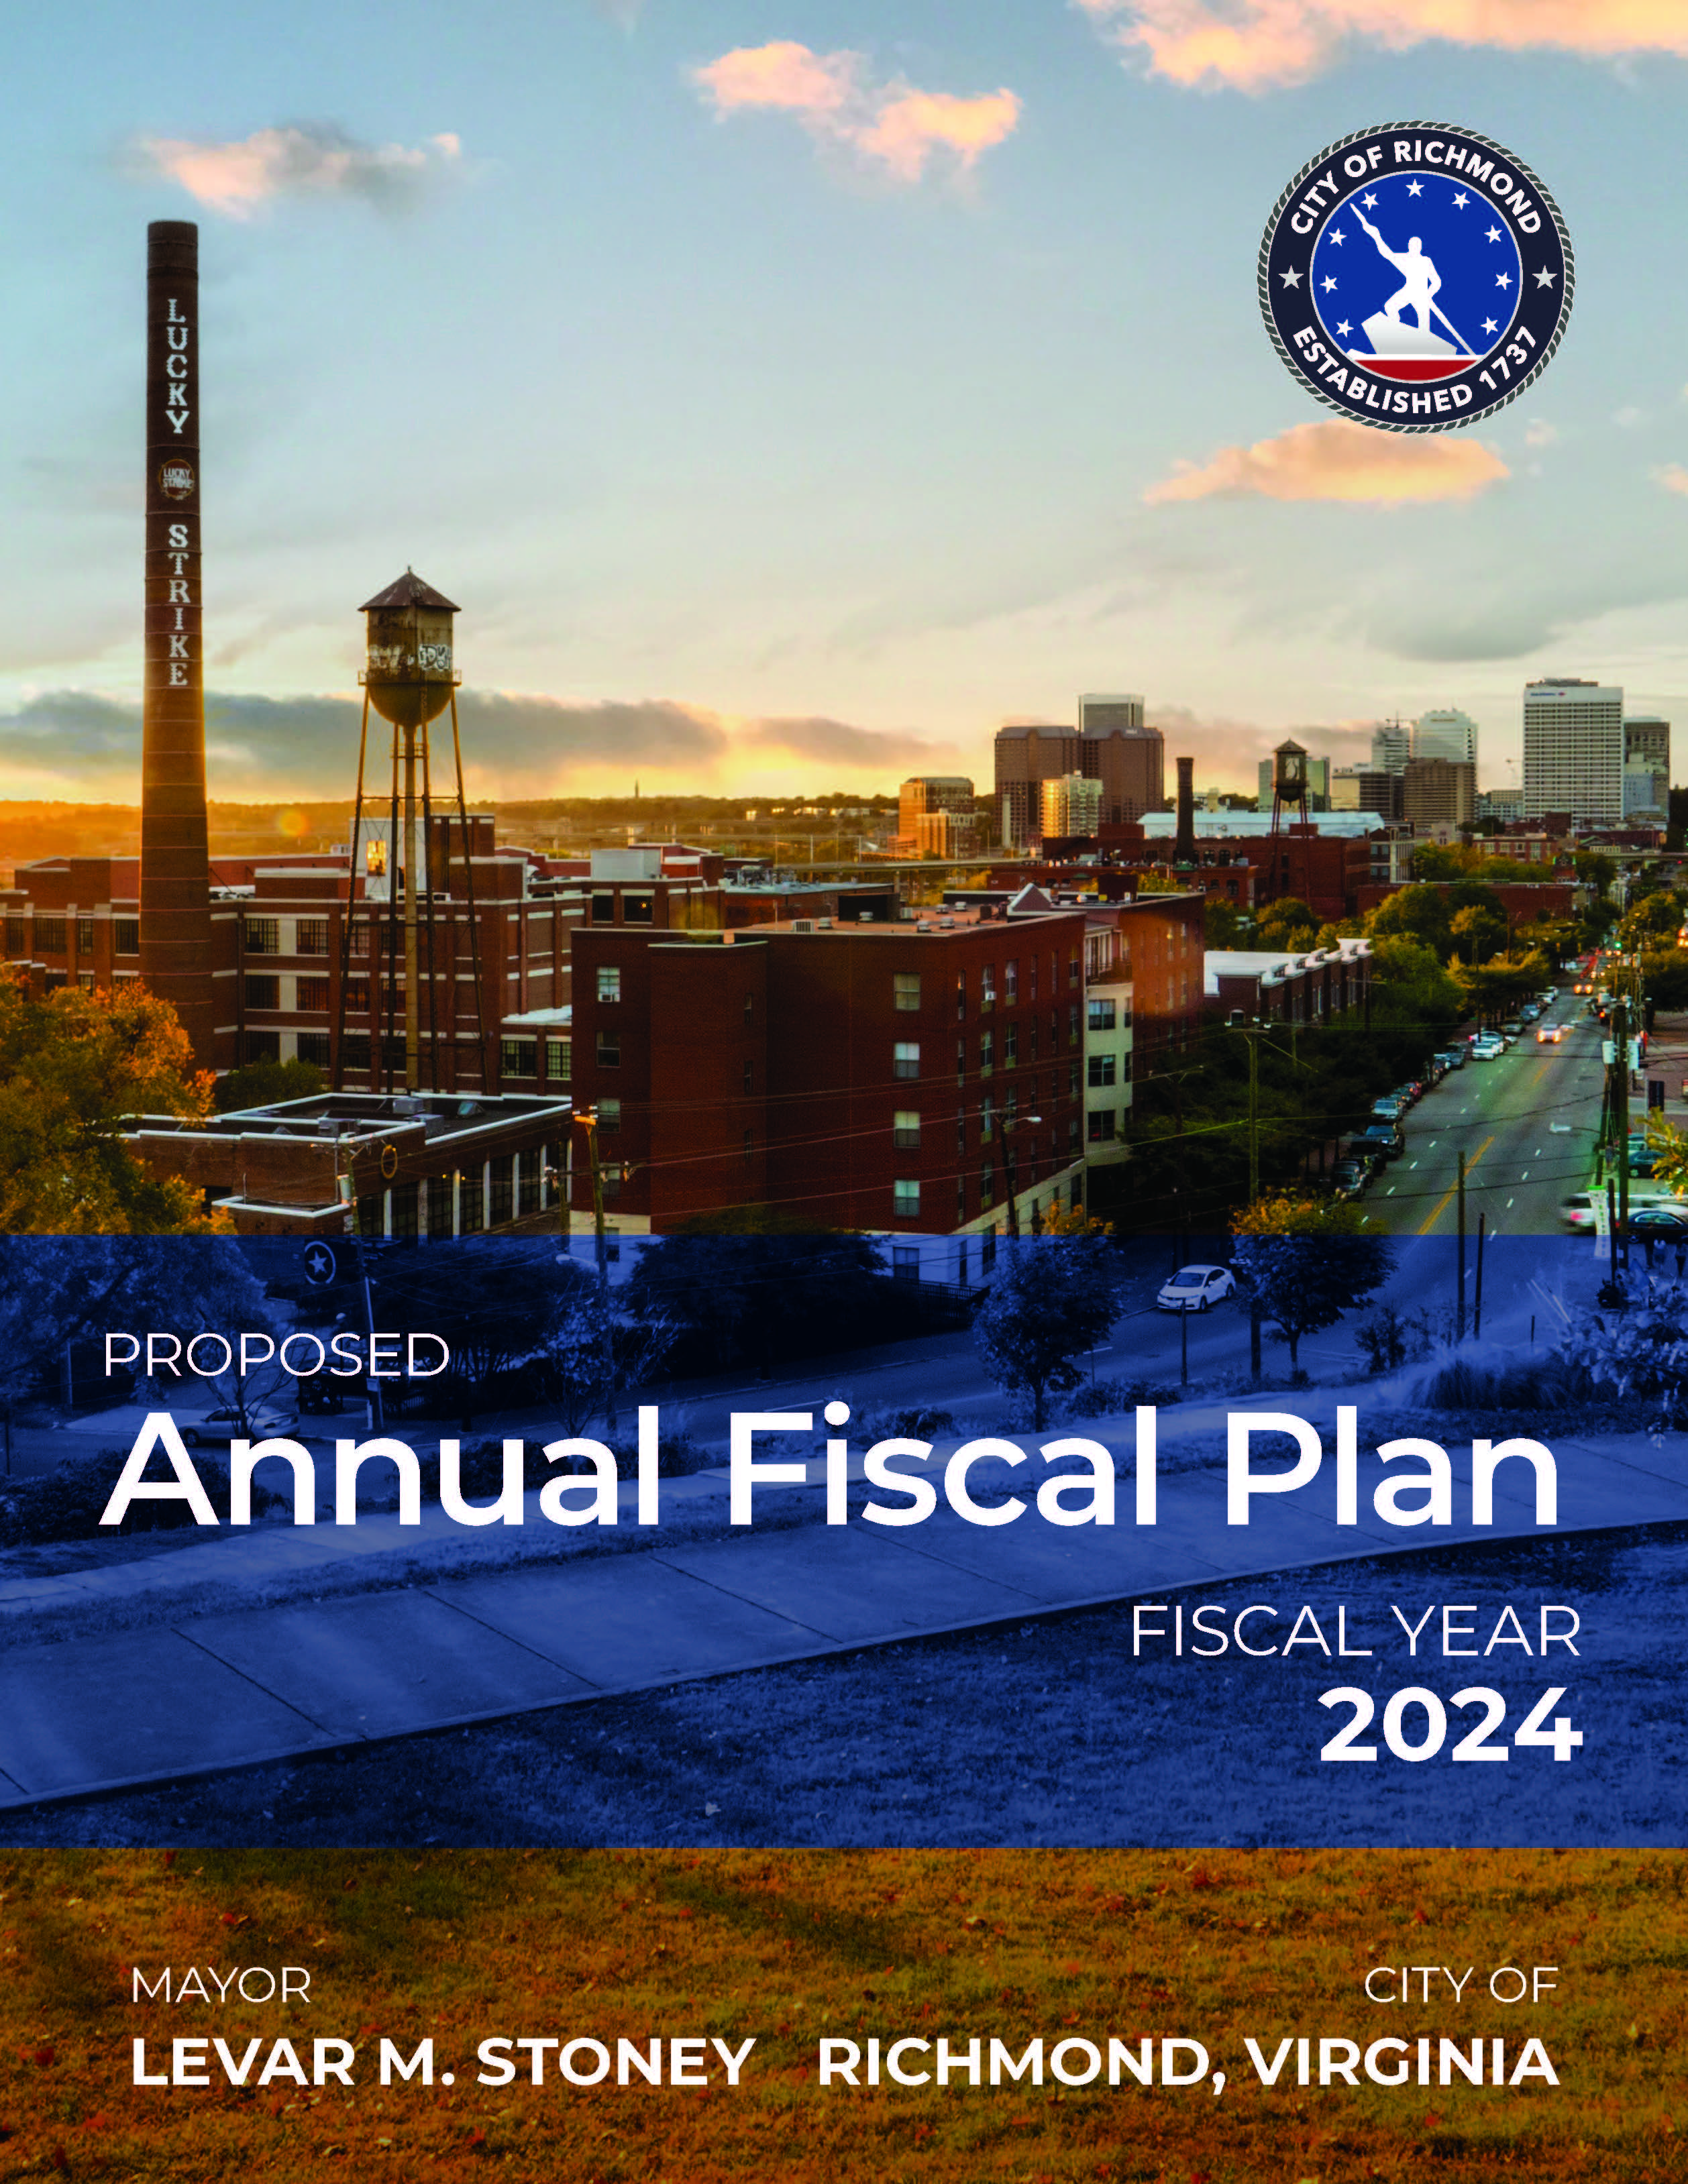 Proposed Annual Fiscal Plan for Fiscal Year 2023